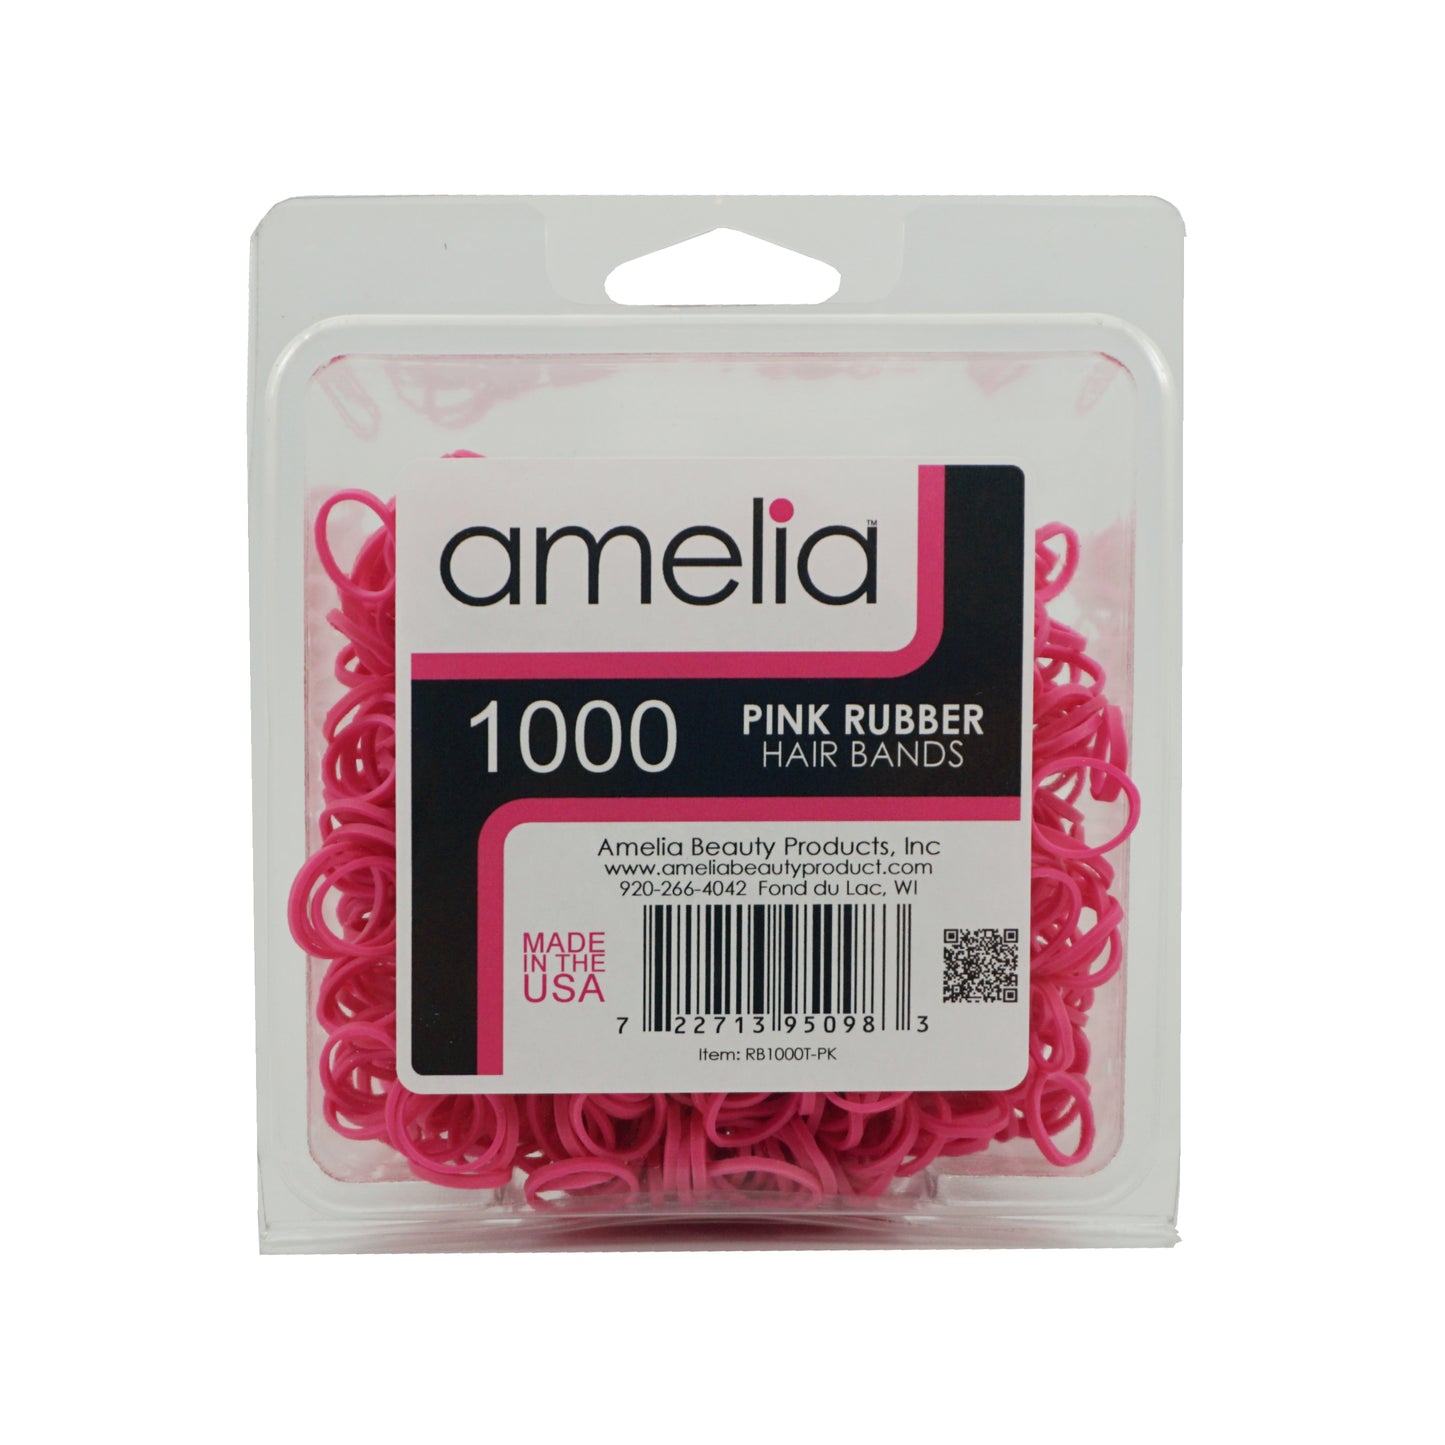 Amelia Beauty | 1/2in, Pink, Elastic Rubber Band Pony Tail Holders | Made in USA, Ideal for Ponytails, Braids, Twists, Dreadlocks, Styling Accessories for Women, Men and Girls | 1000 Pack